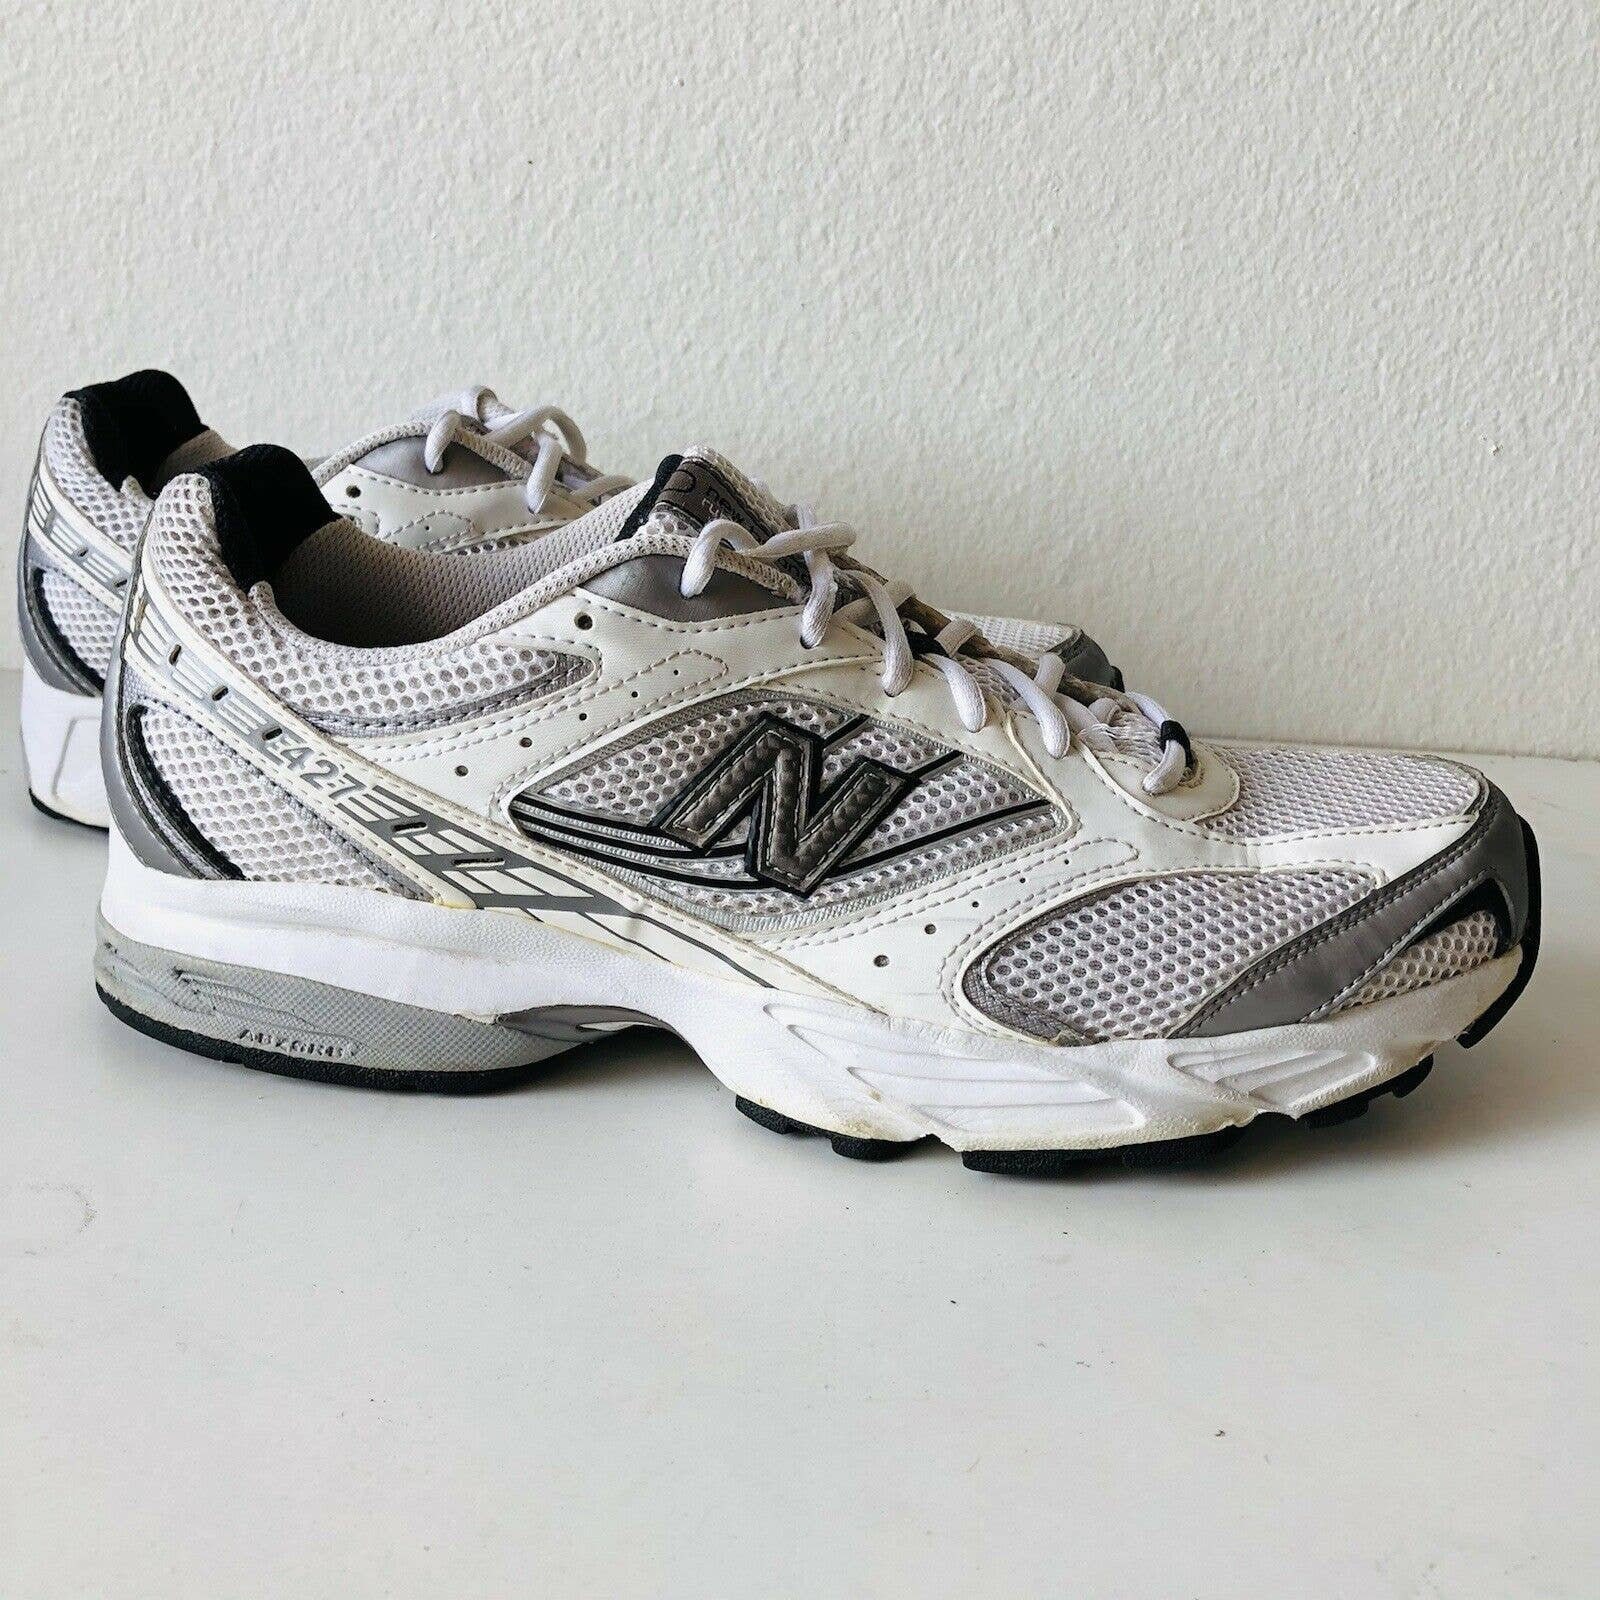 New Balance 427 Mens Running Shoes Dad Style White | Etsy